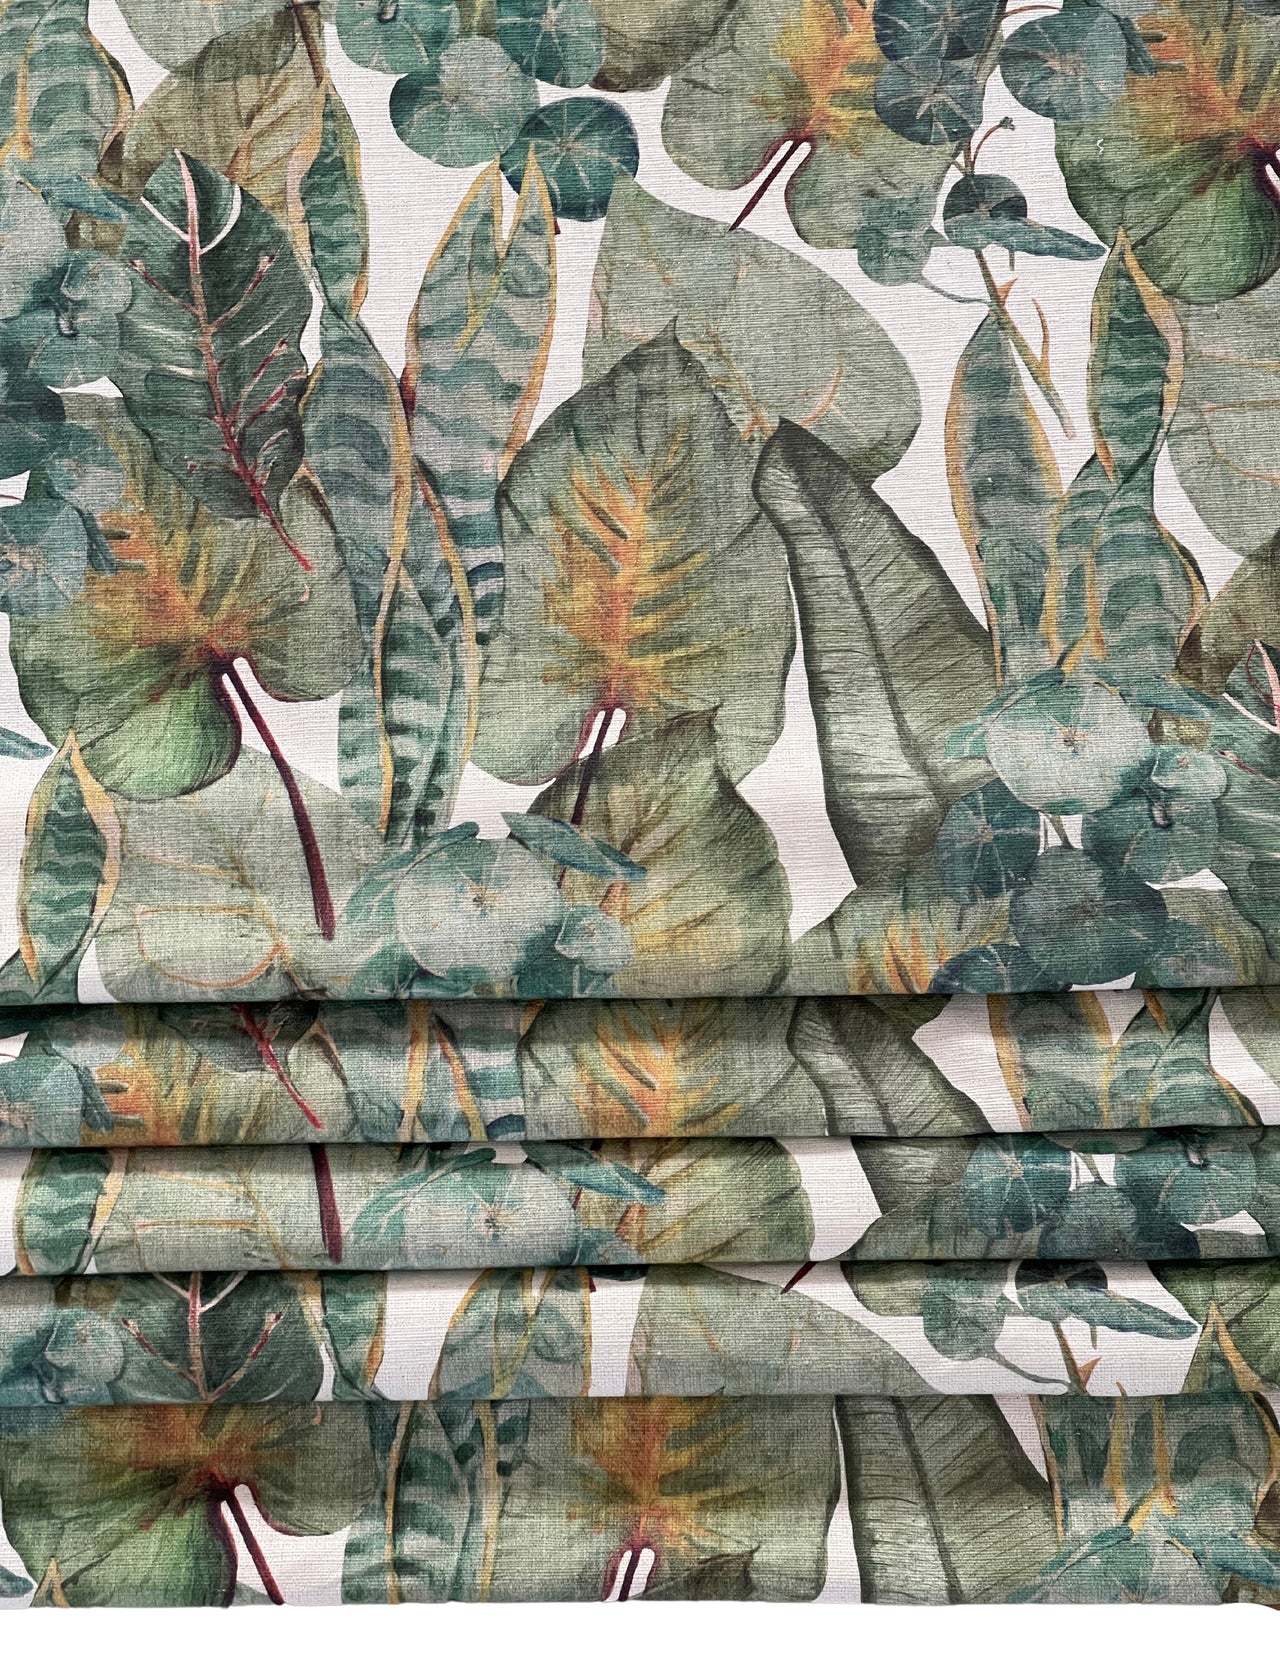 Tropical Oasis Botanical Fabric by the Meter: Houseplant Leaves Print / Greenery - Calathea, Snake Plant, and Elephant Ear